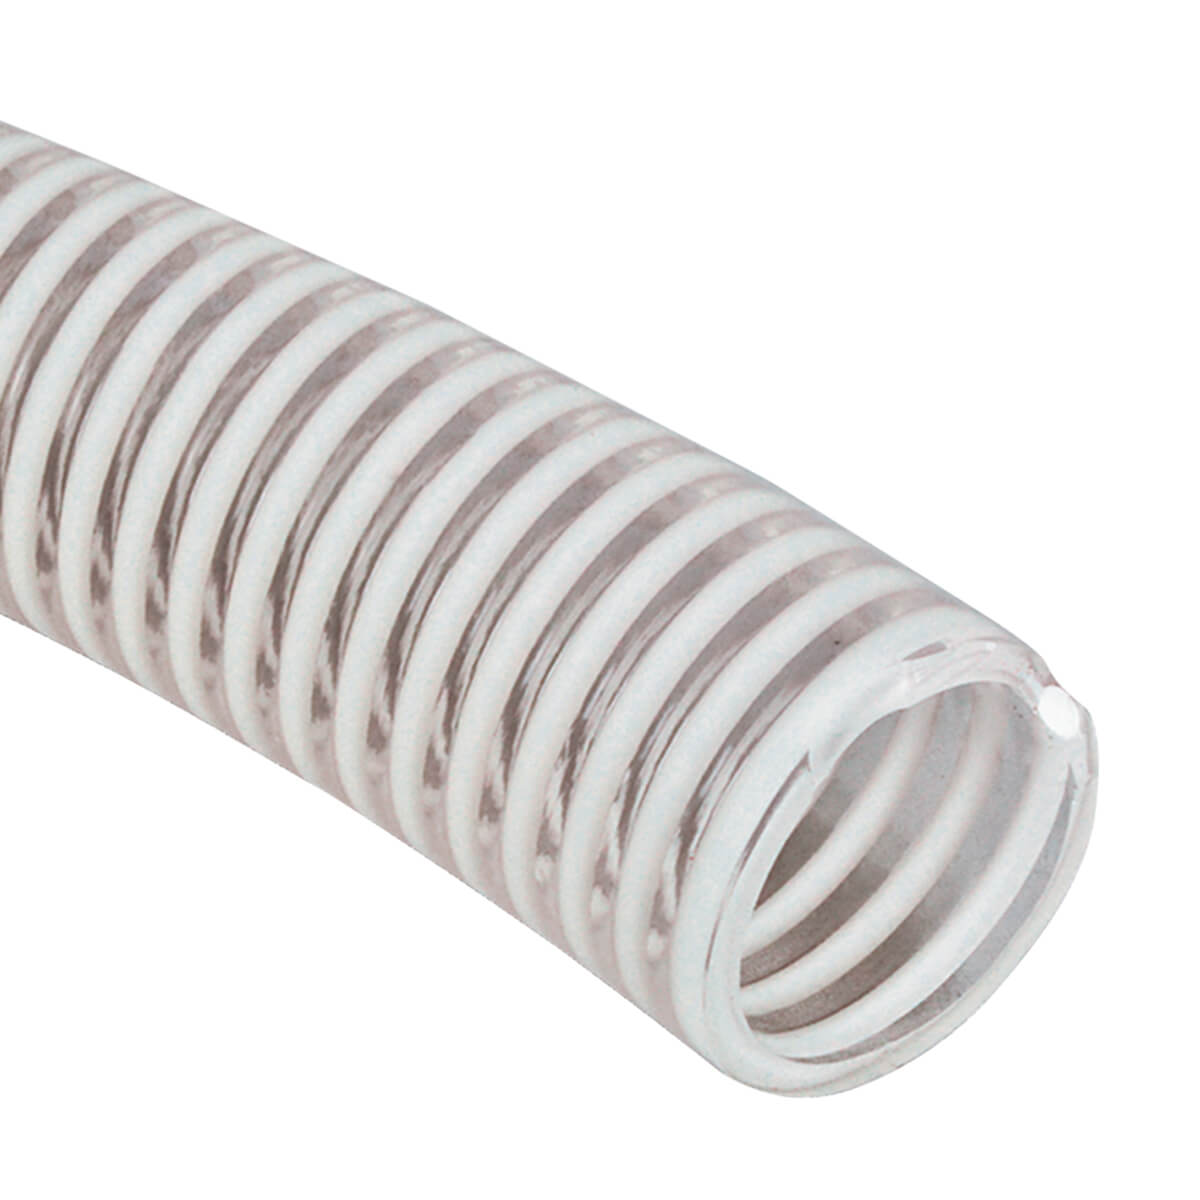 Clear PVC Suction Hose — Bulk/Uncoupled - 3/4-in - Price Per Ft